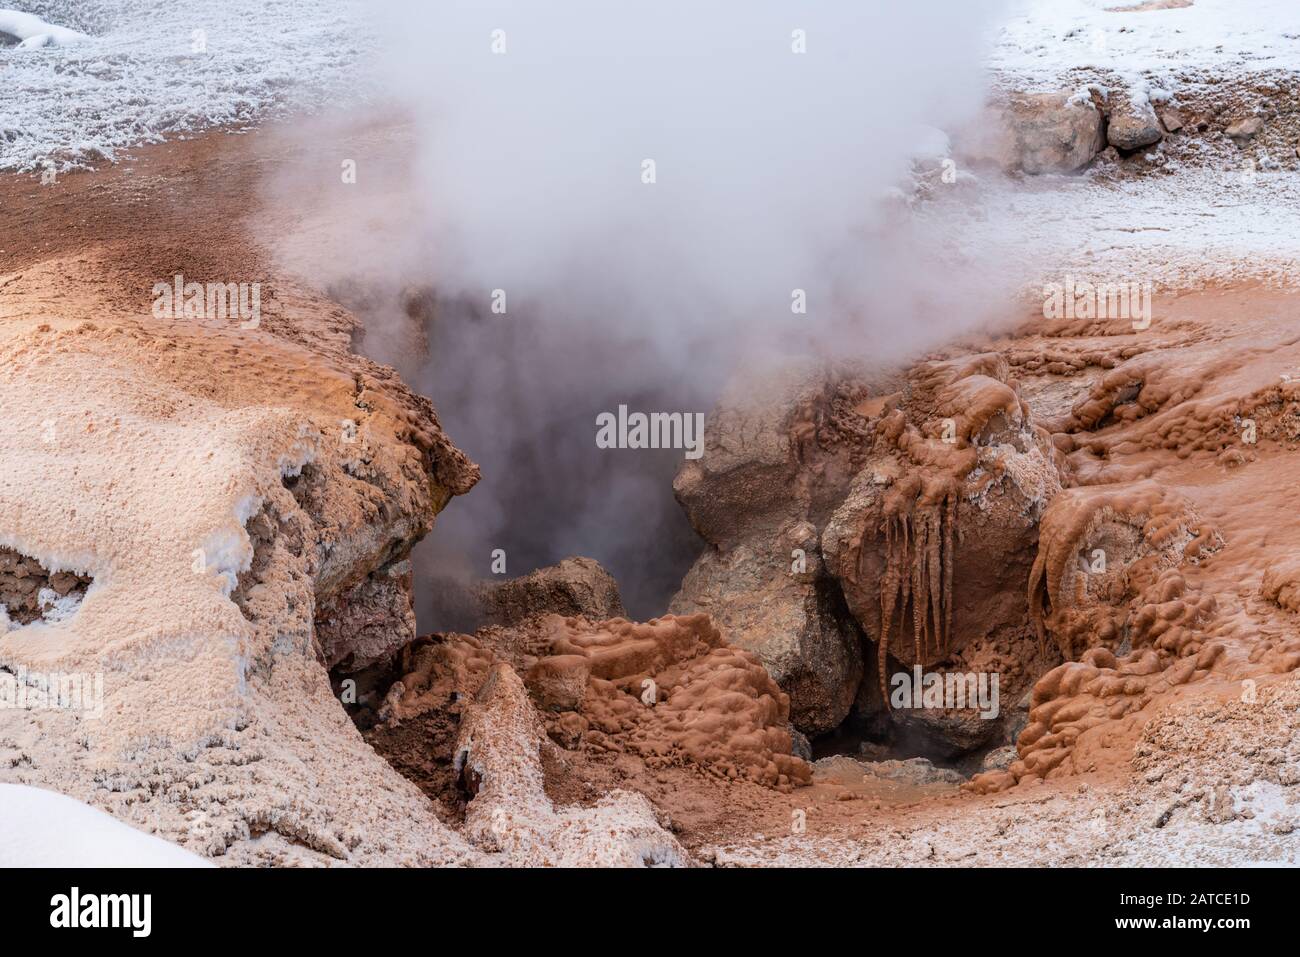 Steam and red mud are vented out of a fumarole. Yellowstone National Park, Wyoming, USA Stock Photo